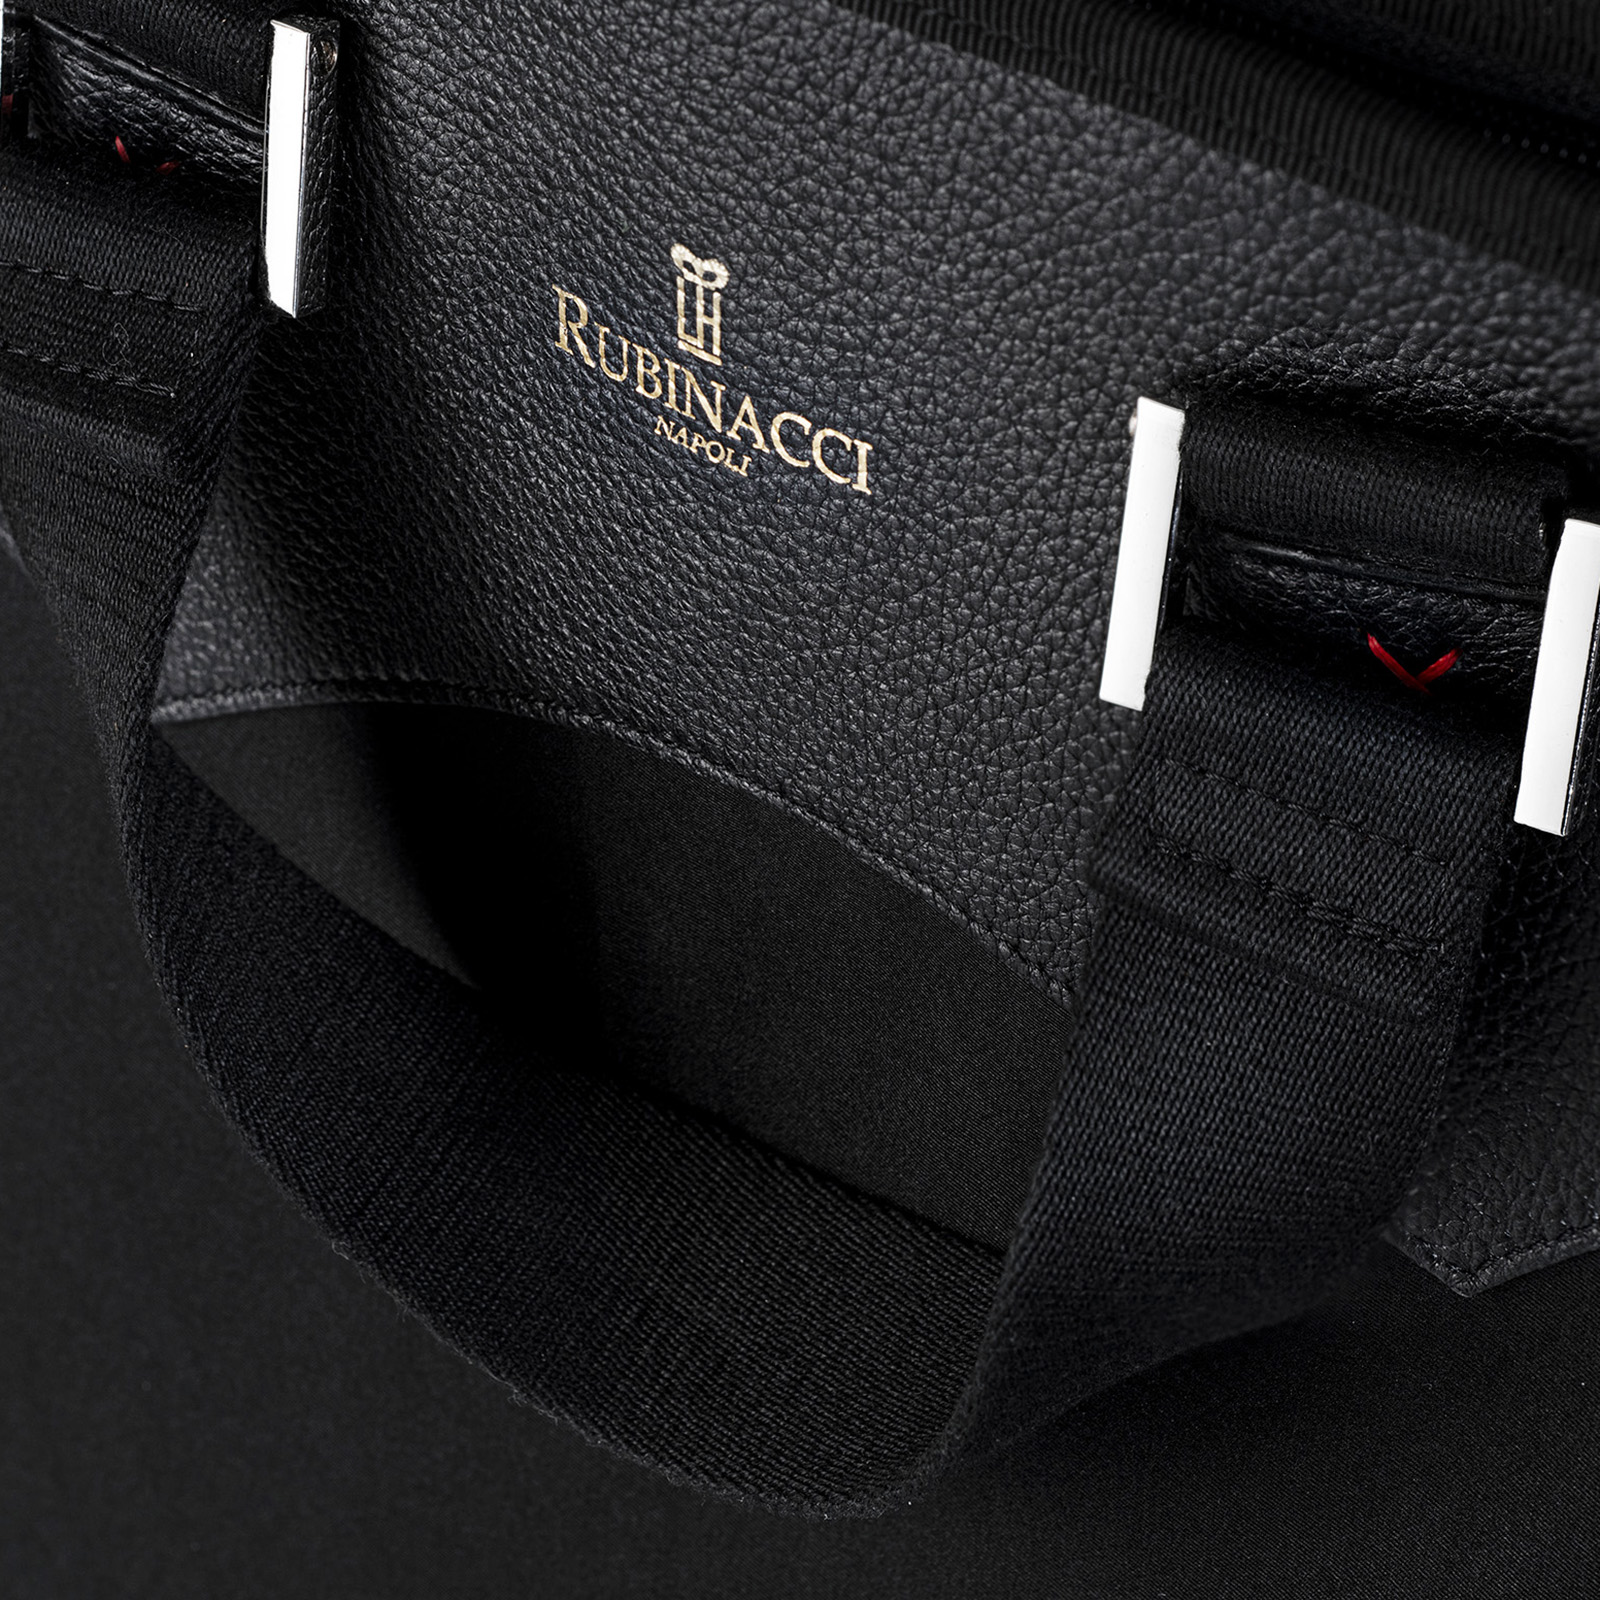 Mariano Rubinacci - Suit carrier in black canvas